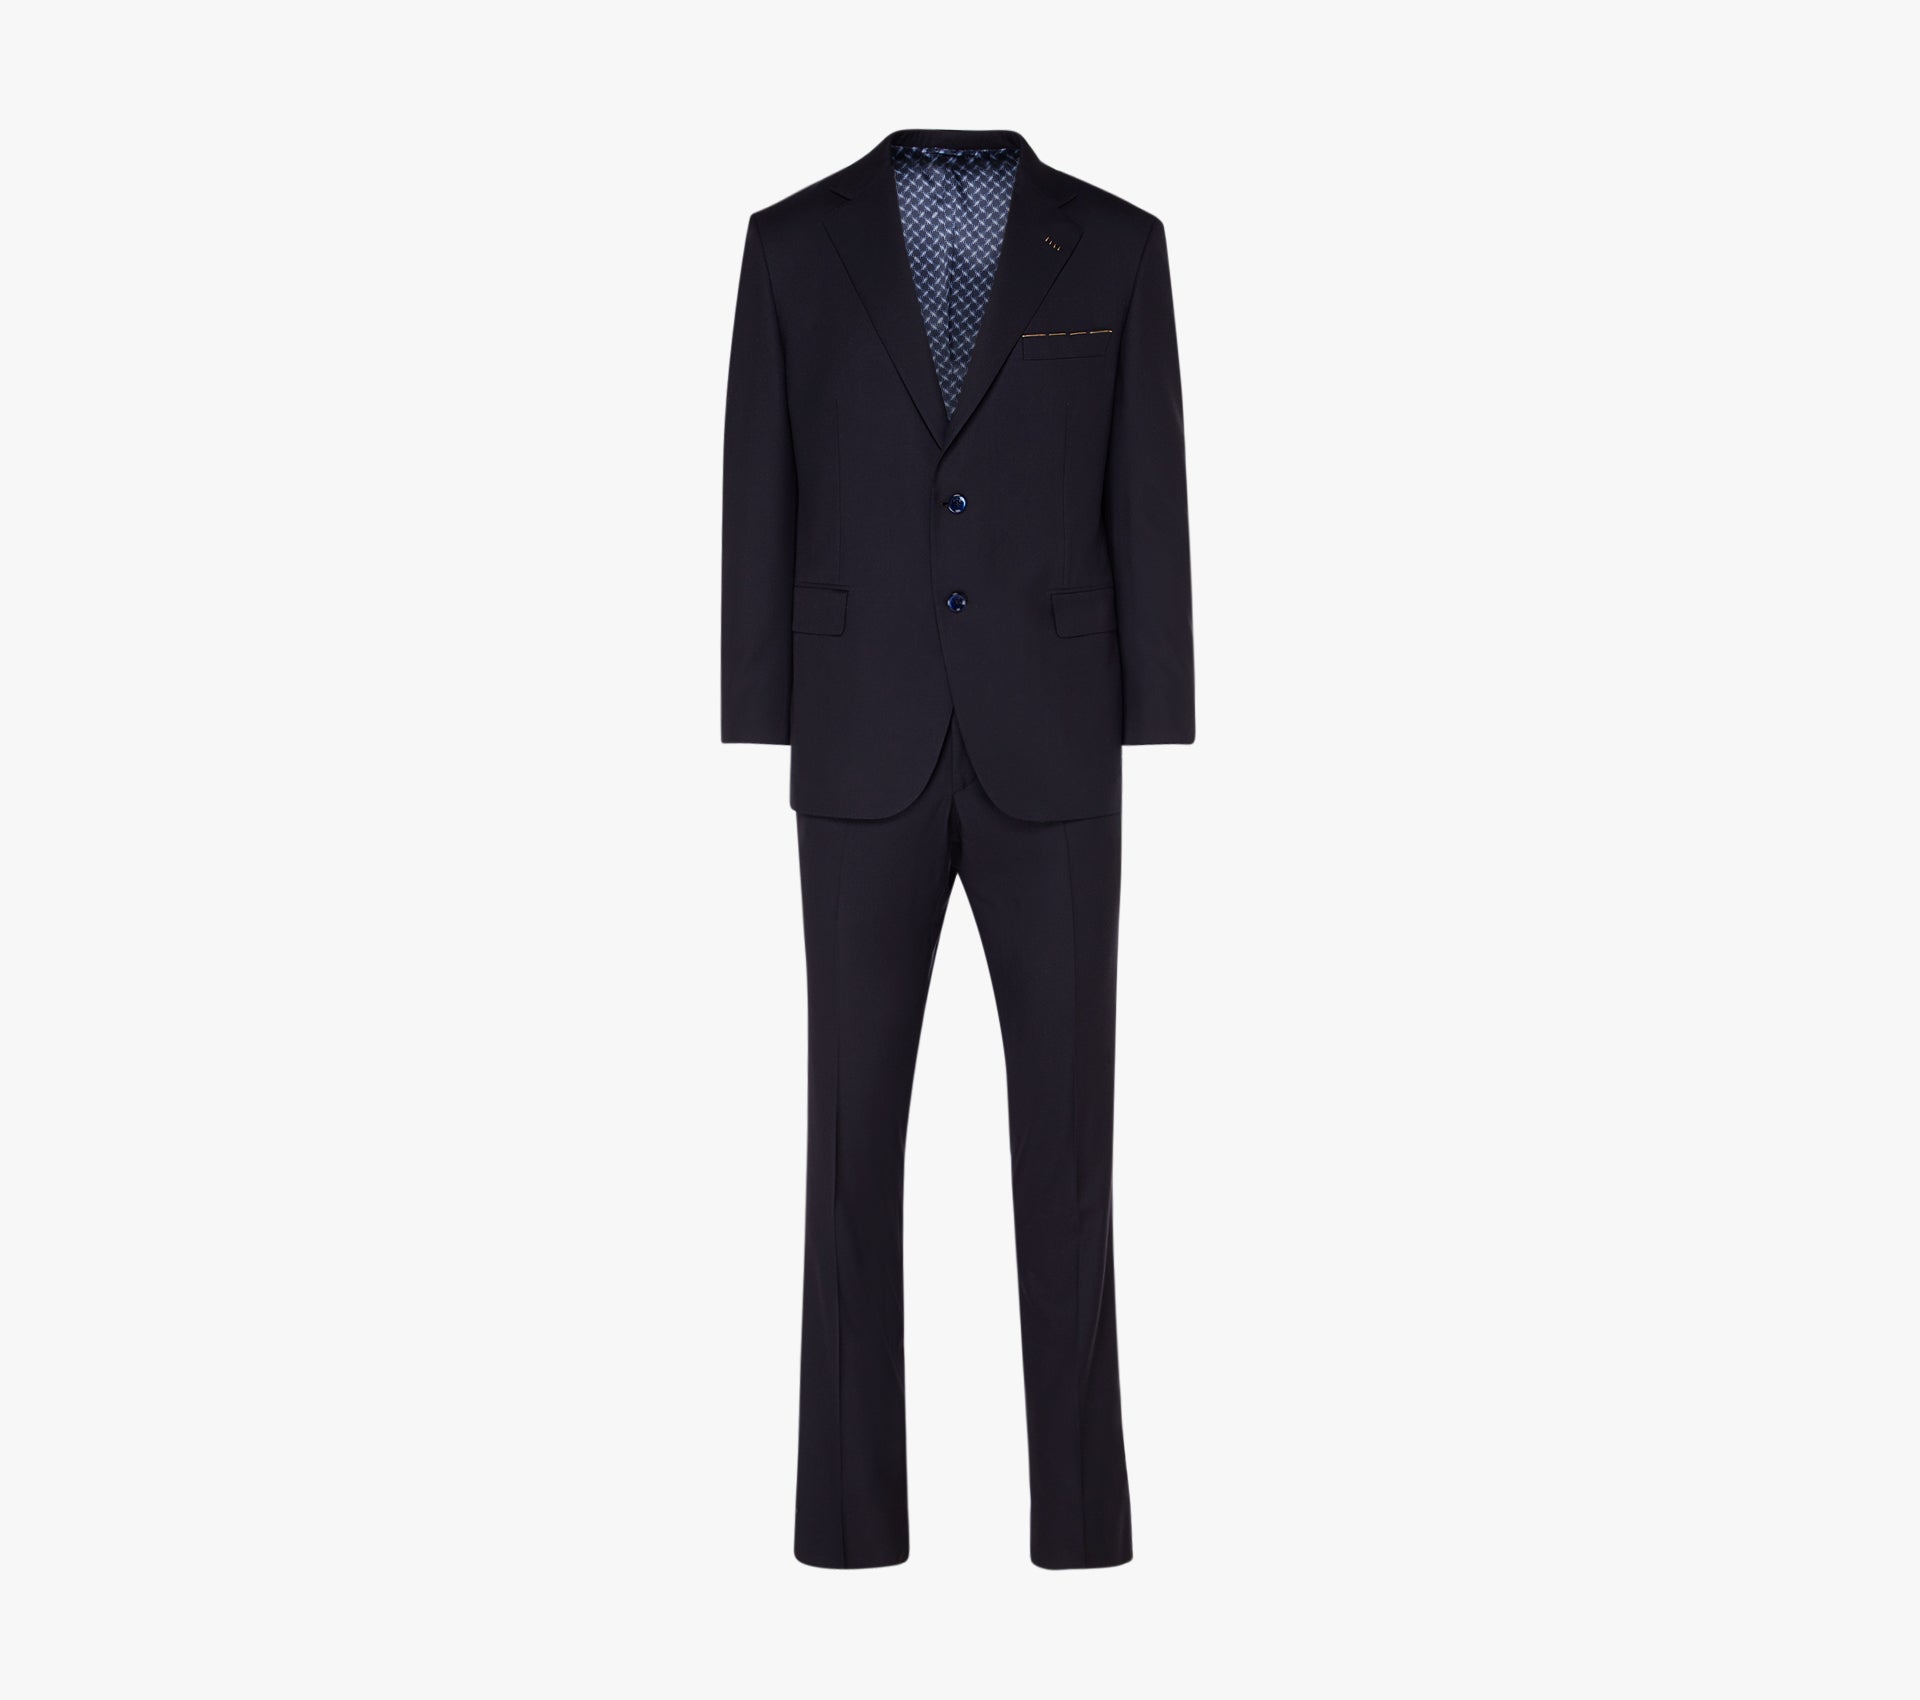 Navy Two-Button Suit